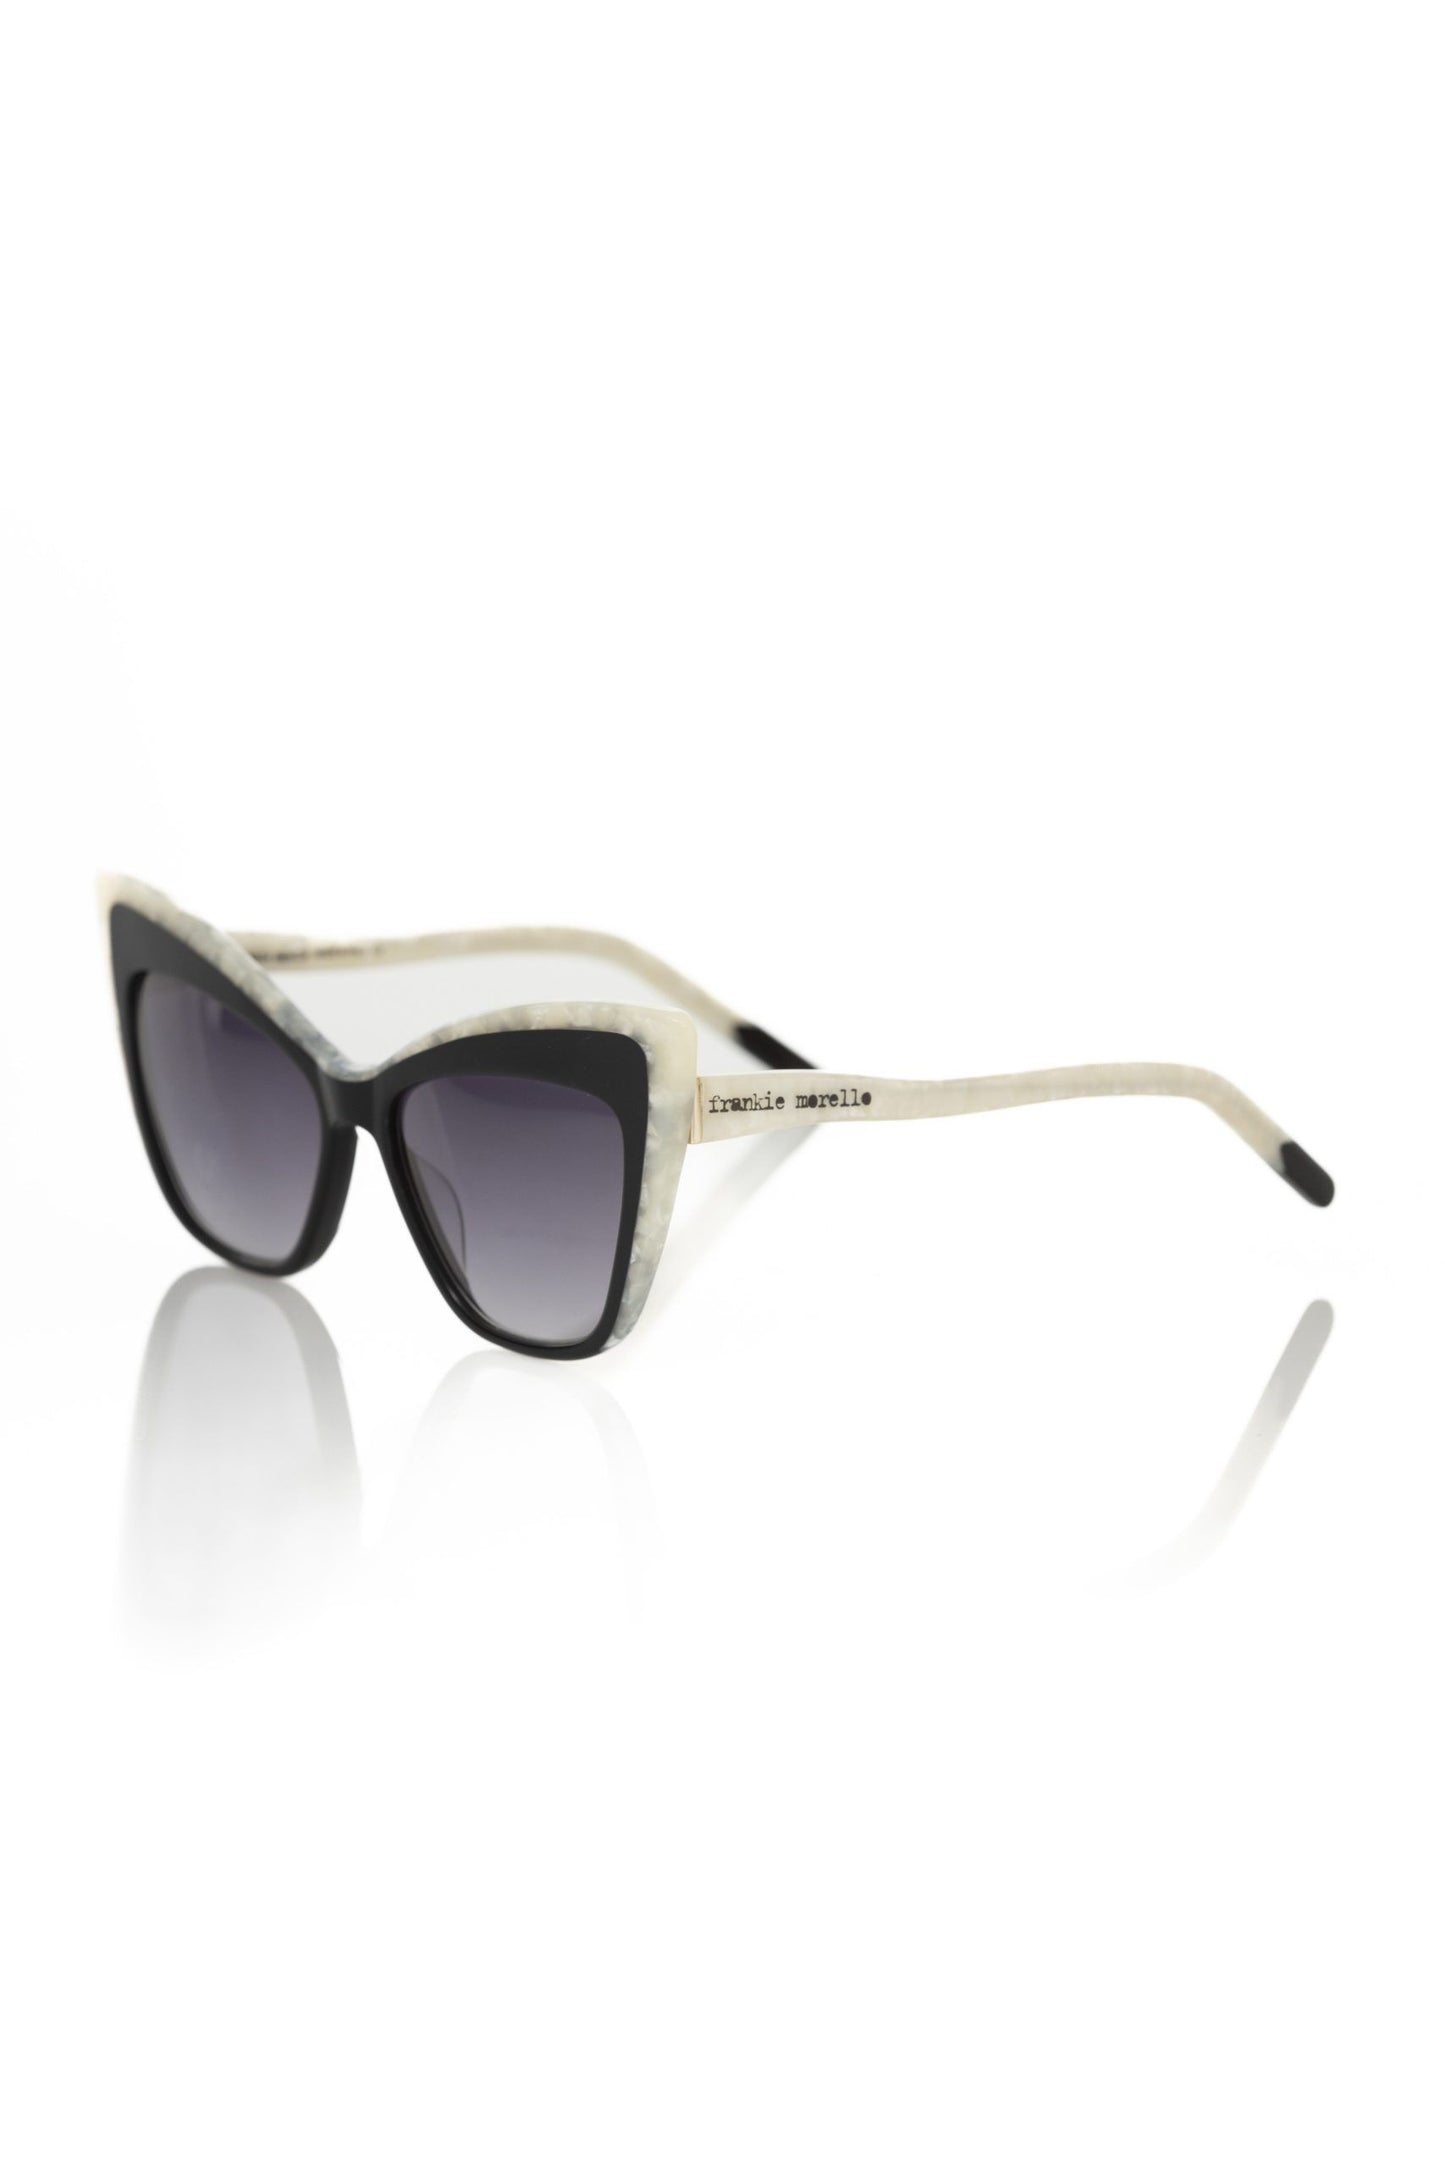 Chic Cat Eye Sunglasses with Pearly Accents